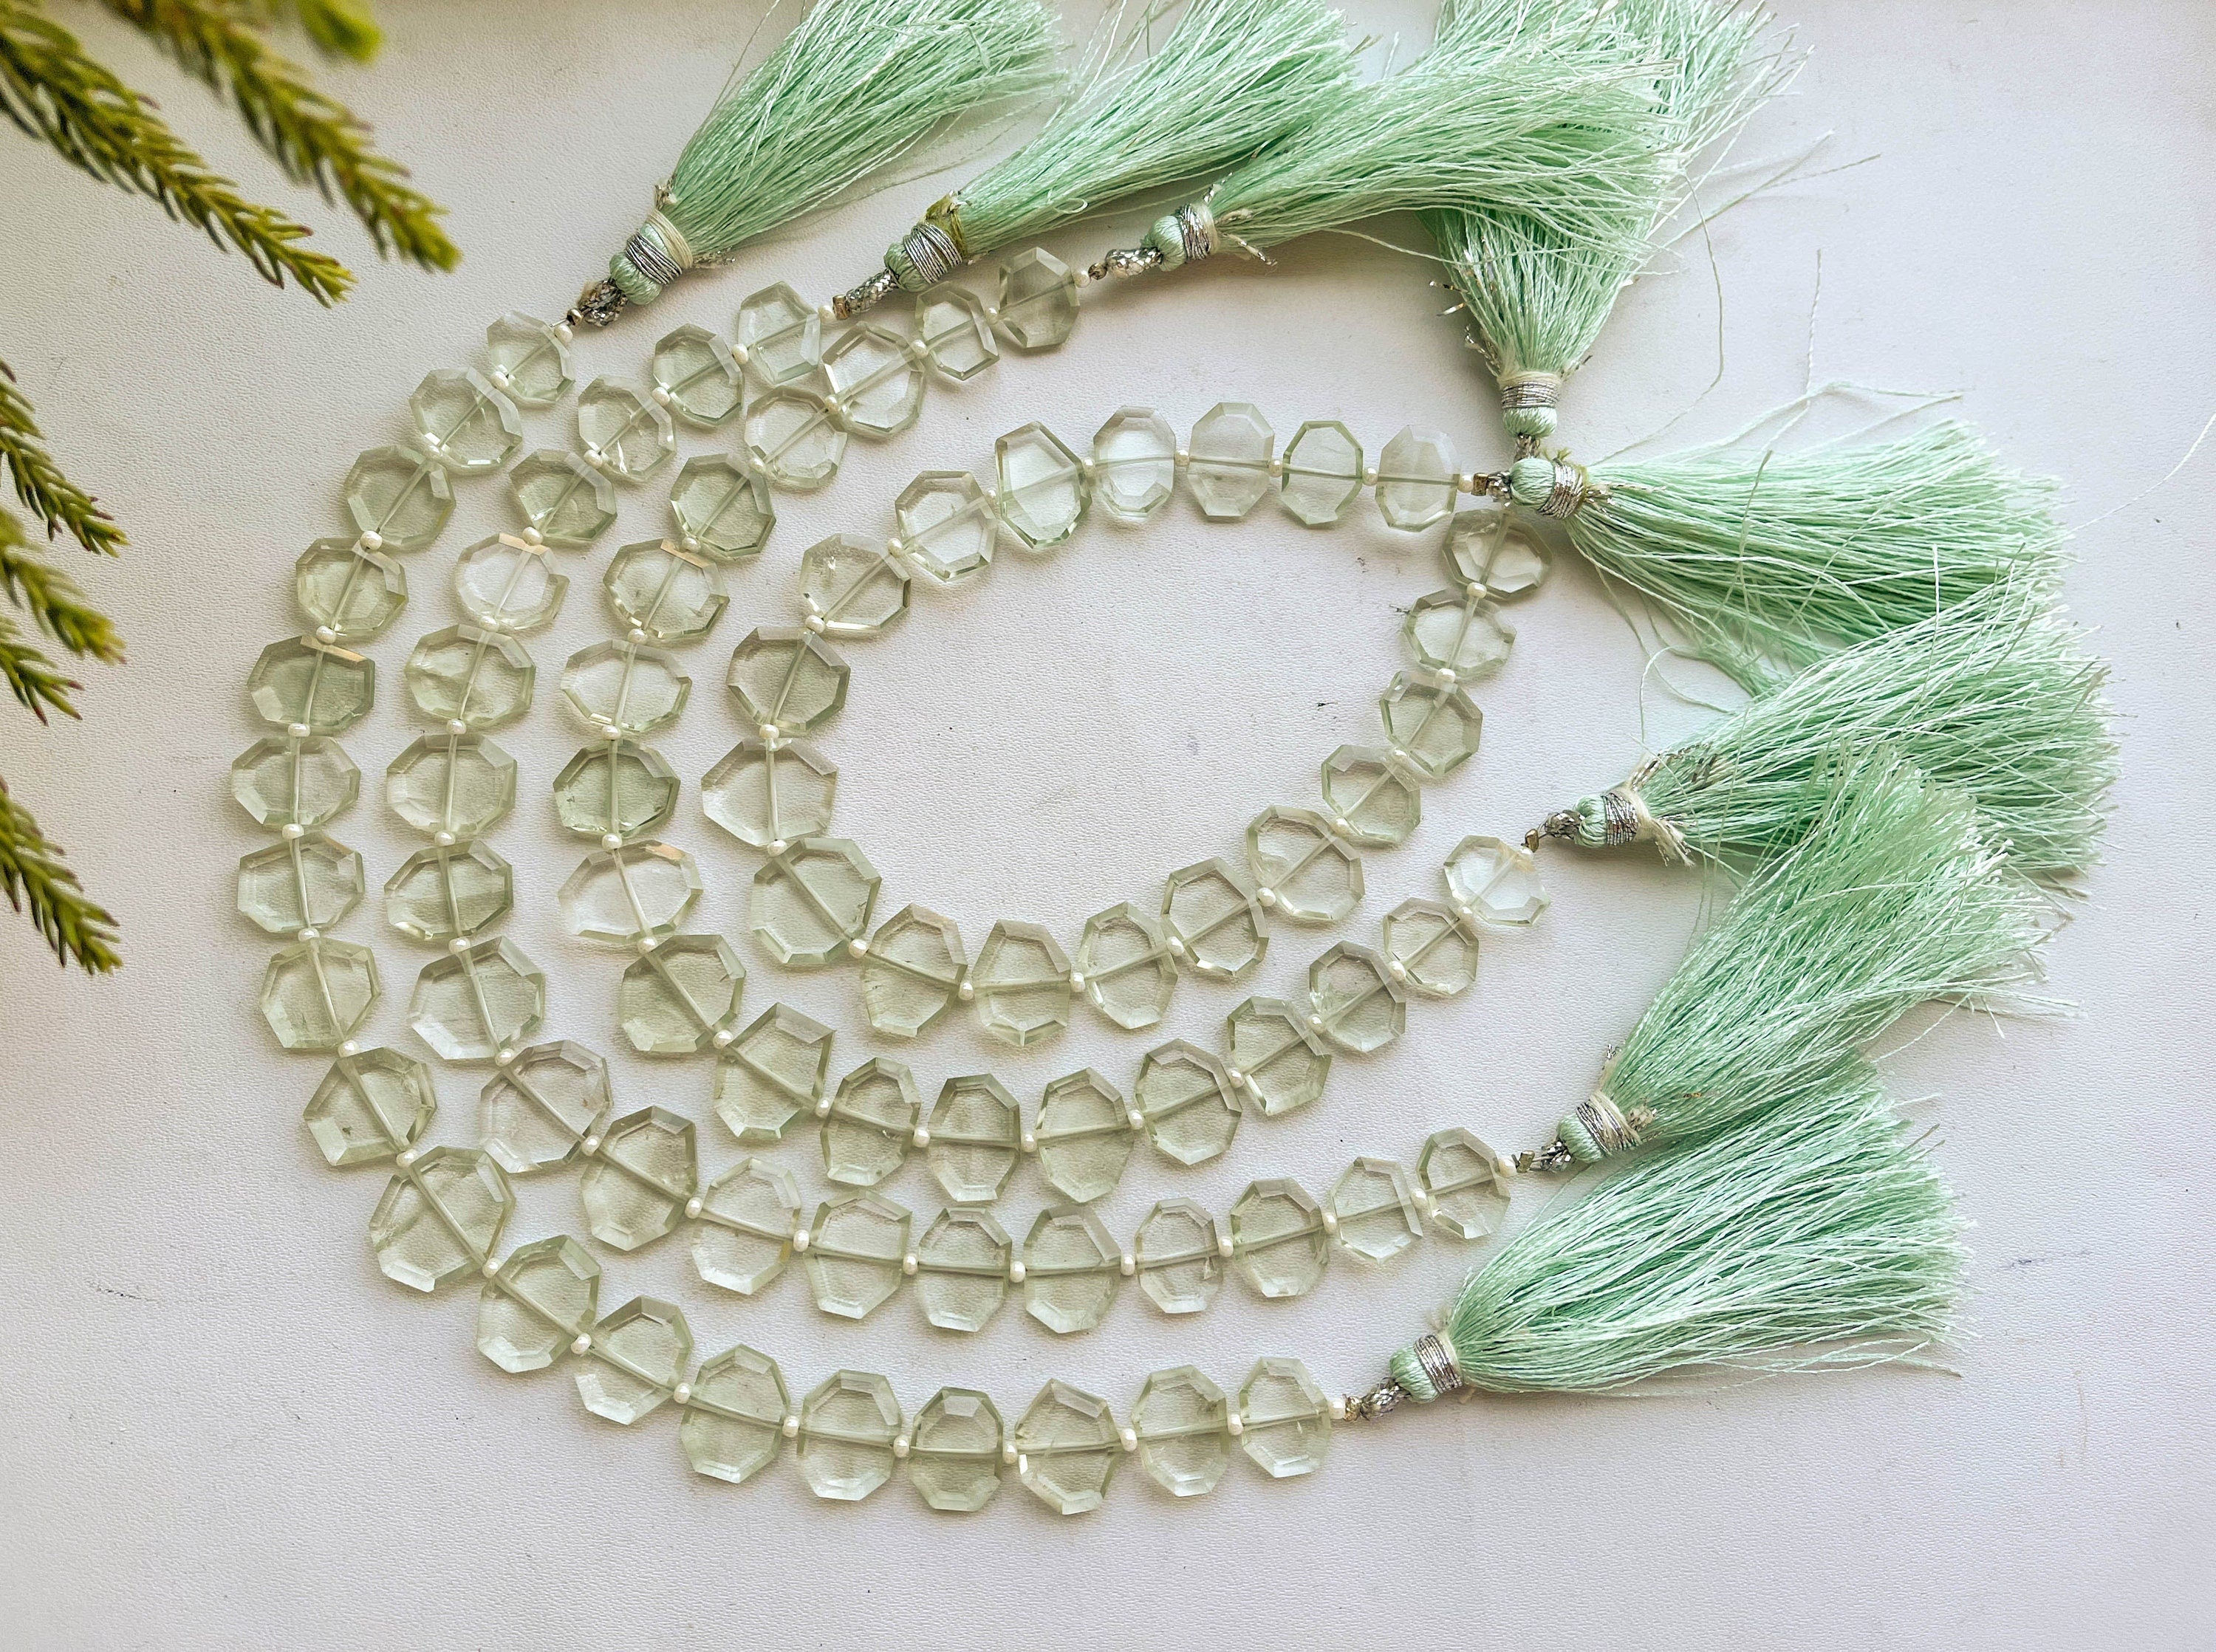 18 Pieces GREEN AMETHYST Fancy Crown Cut Beads | 8 Inch String | Natural Gemstone Beads | Beadsforyourjewellery Beadsforyourjewelry